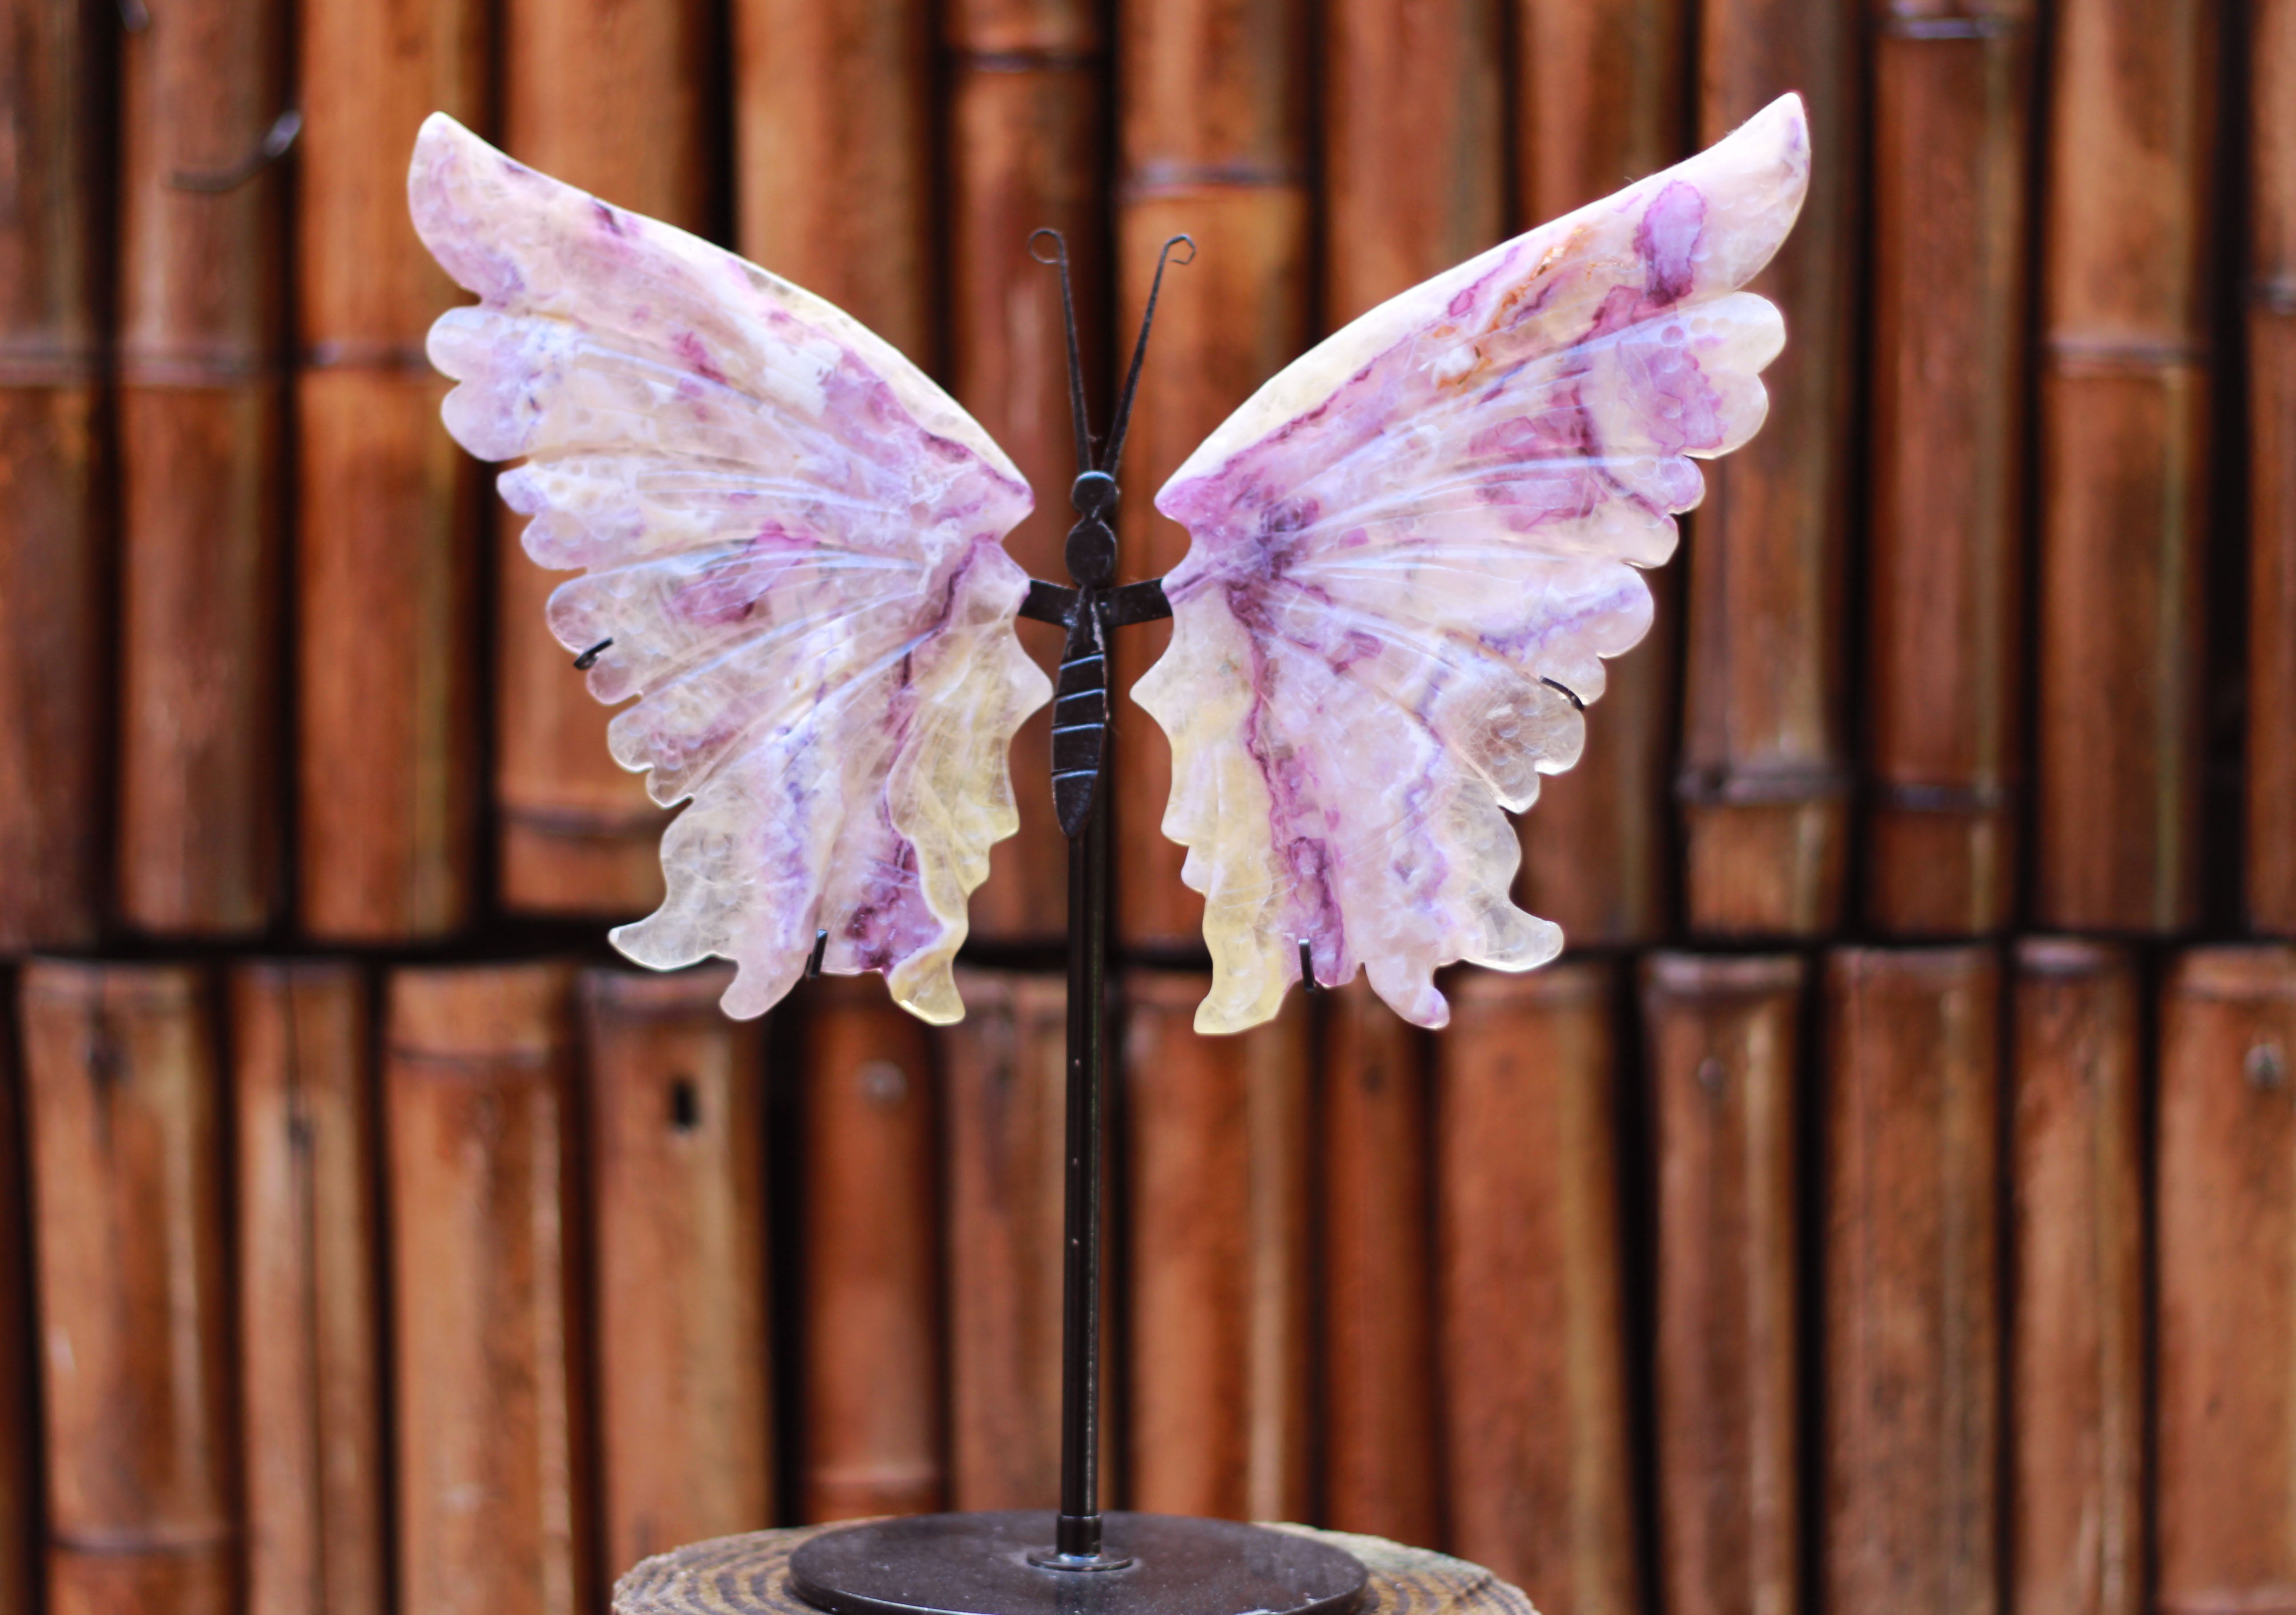 Rainbow Fluorite butterfly wings in stand for Focus, Creativity & Productivity